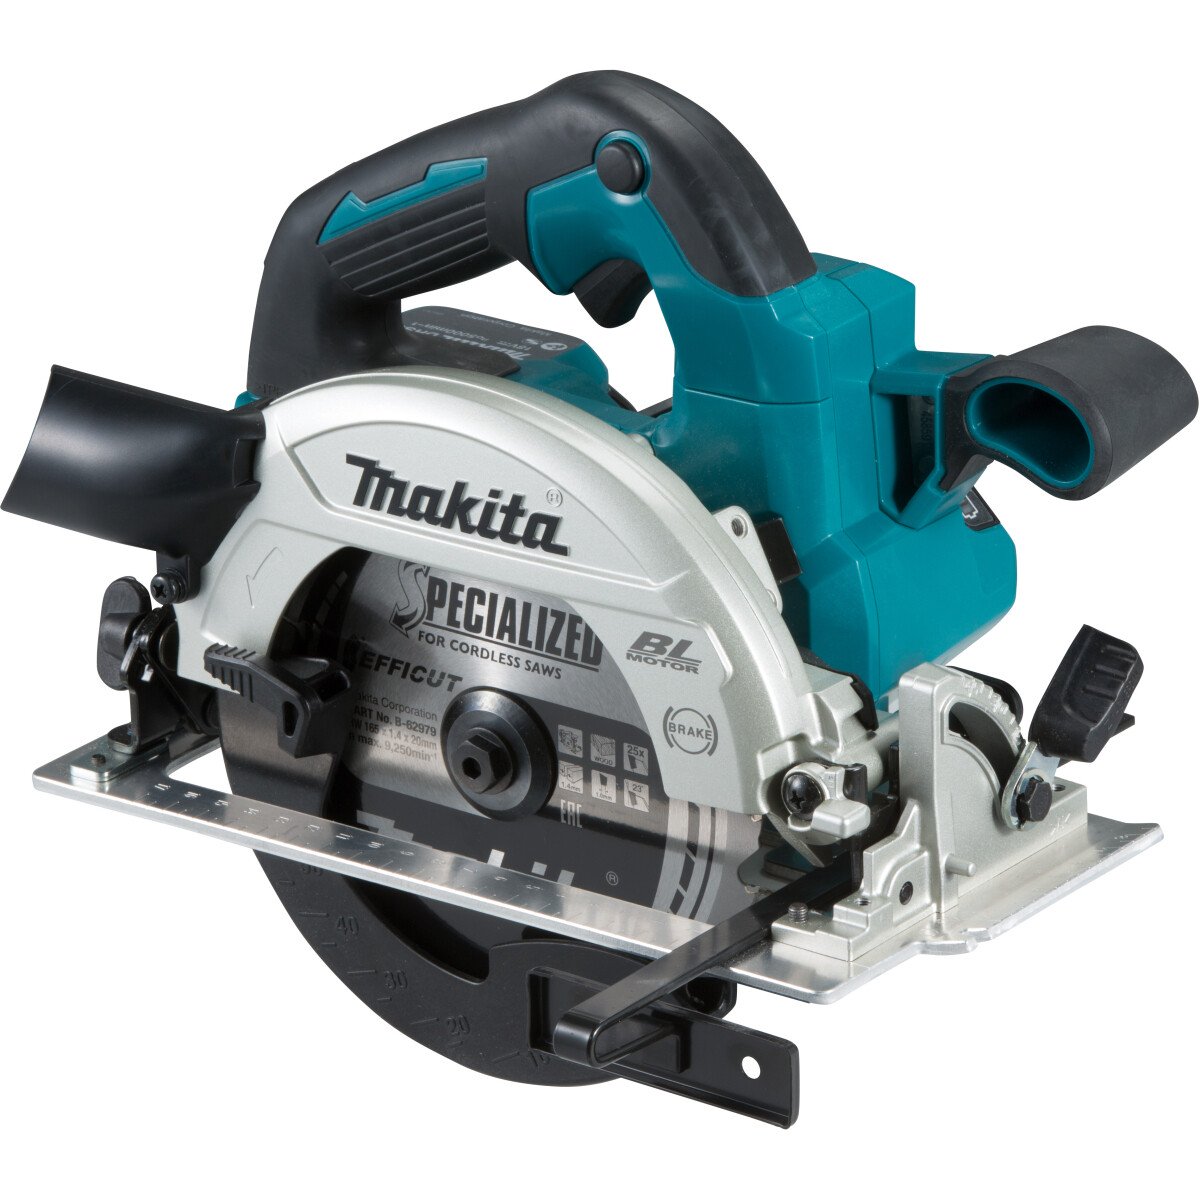  DHS660Z Body Only 18V LXT Brushless 165mm Circular Saw (Replaces .